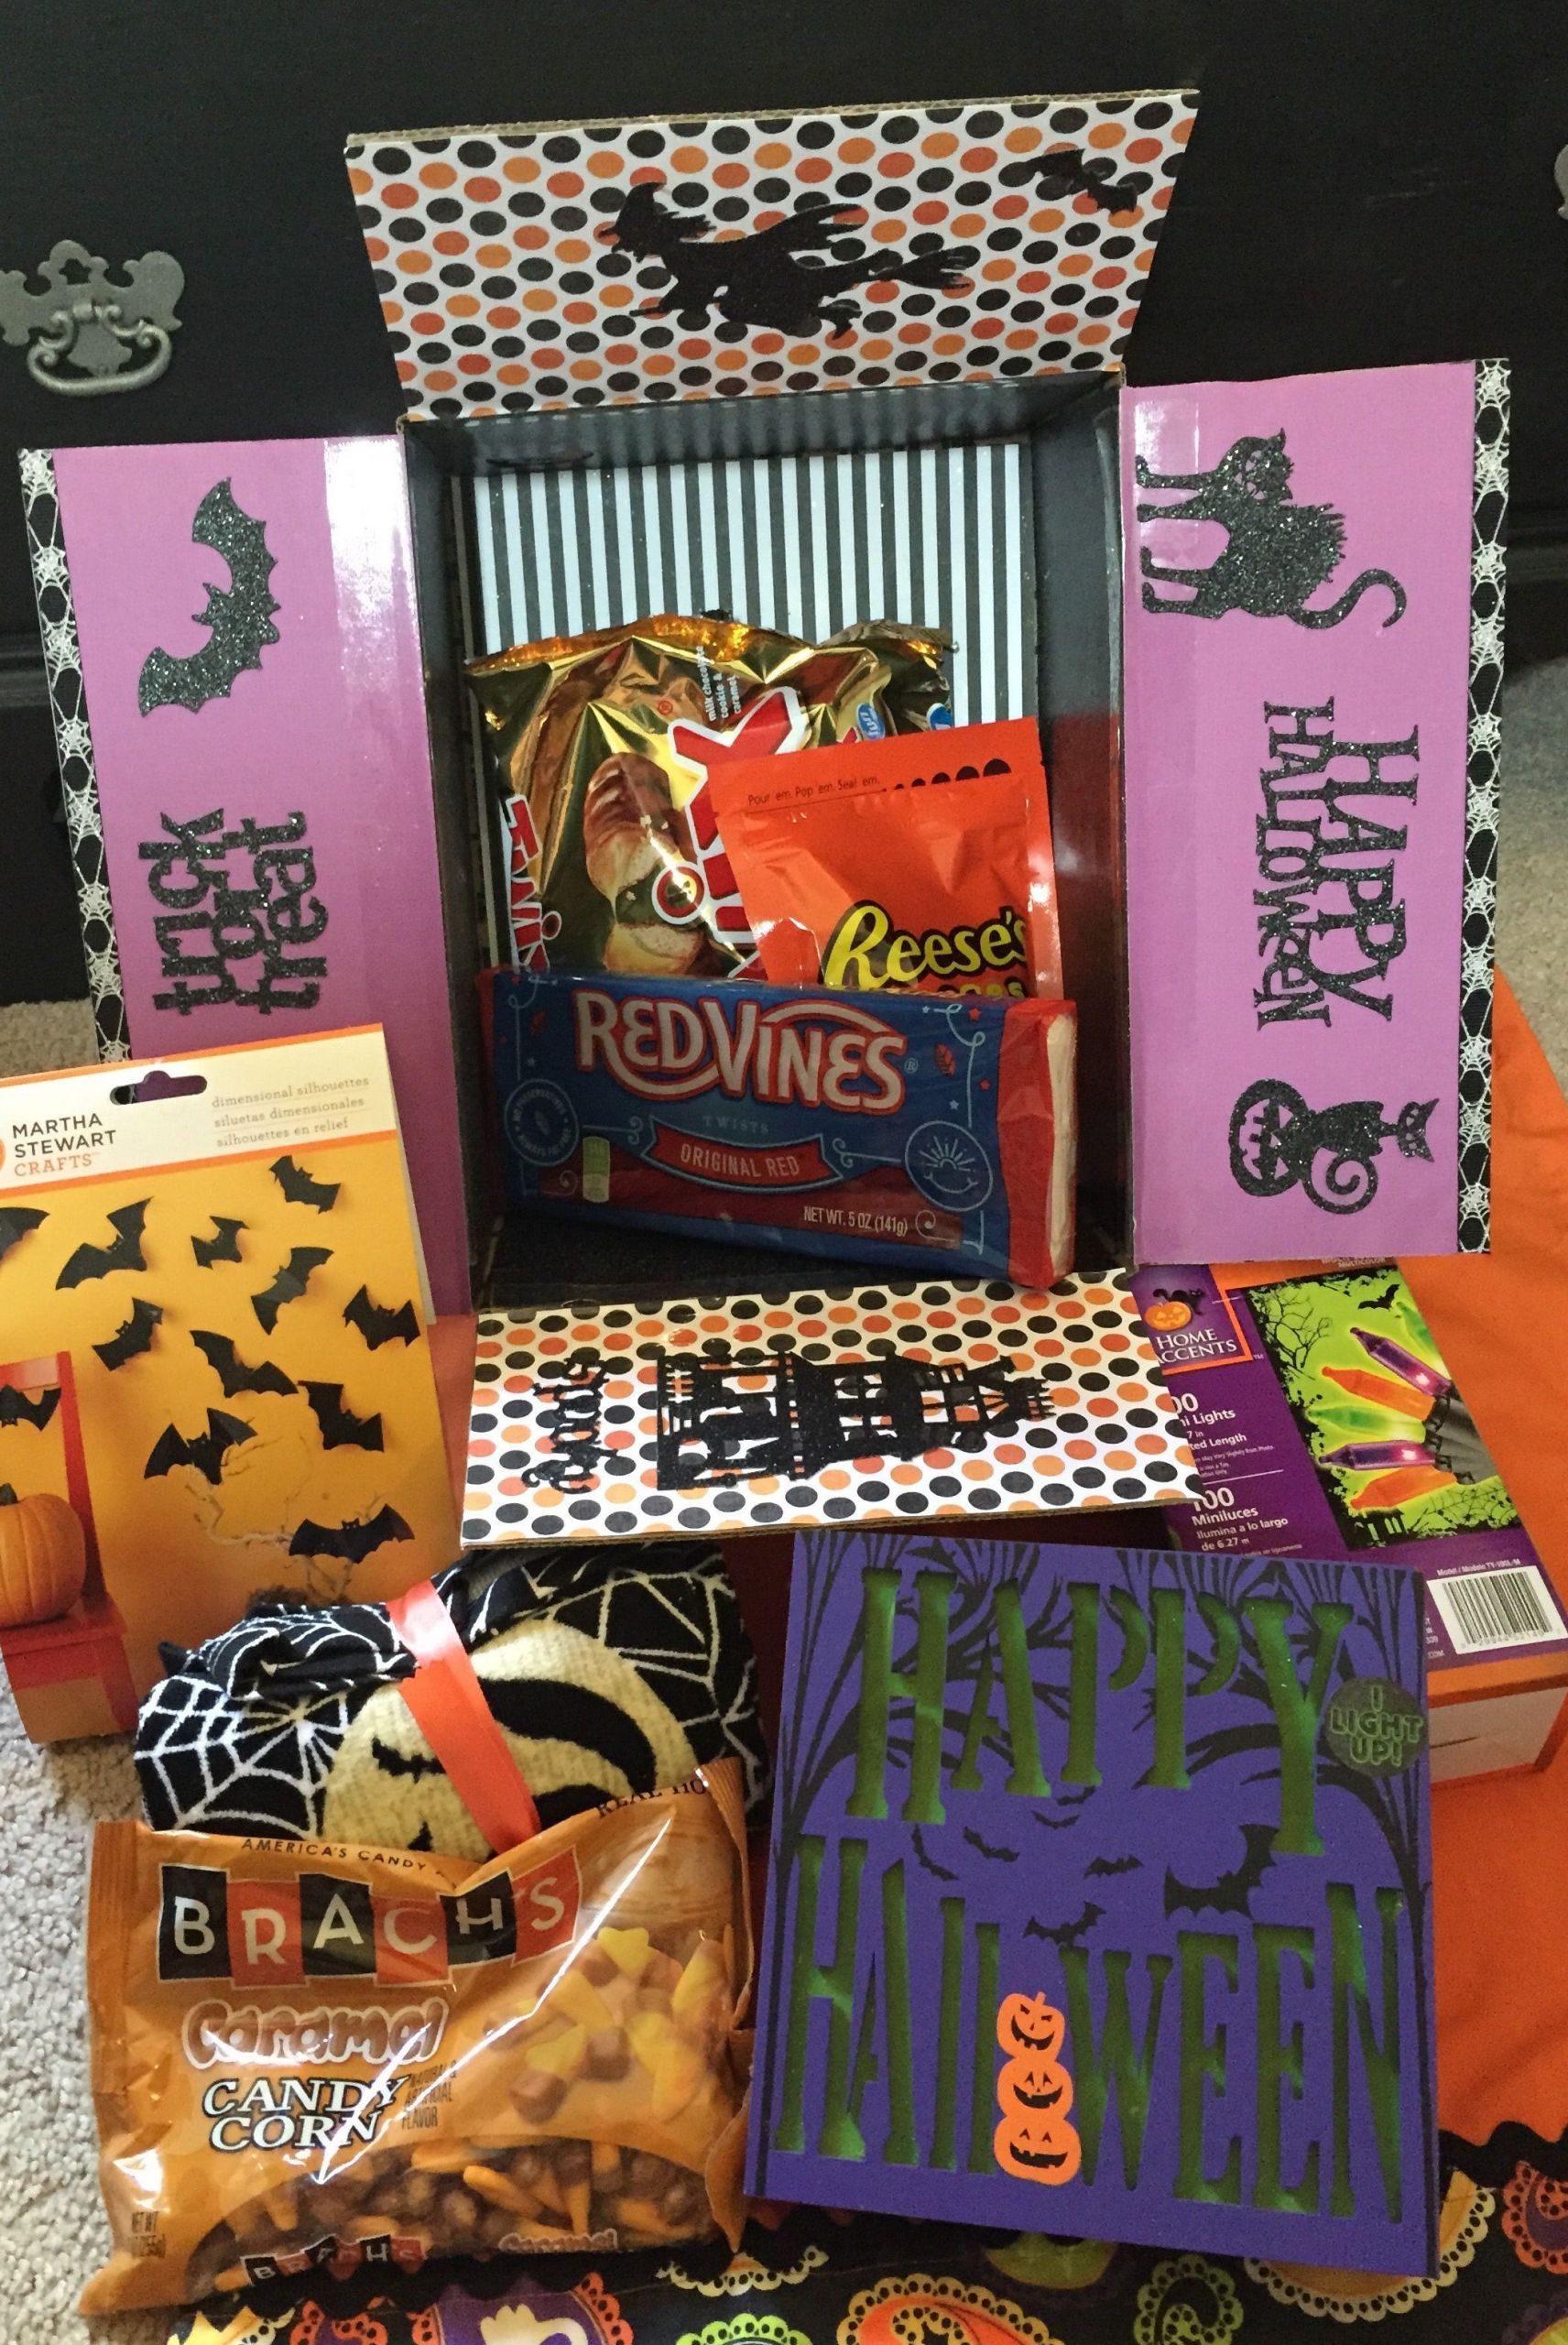 Halloween Party Ideas For College Students
 33 Amazing Halloween Care Package Ideas for College